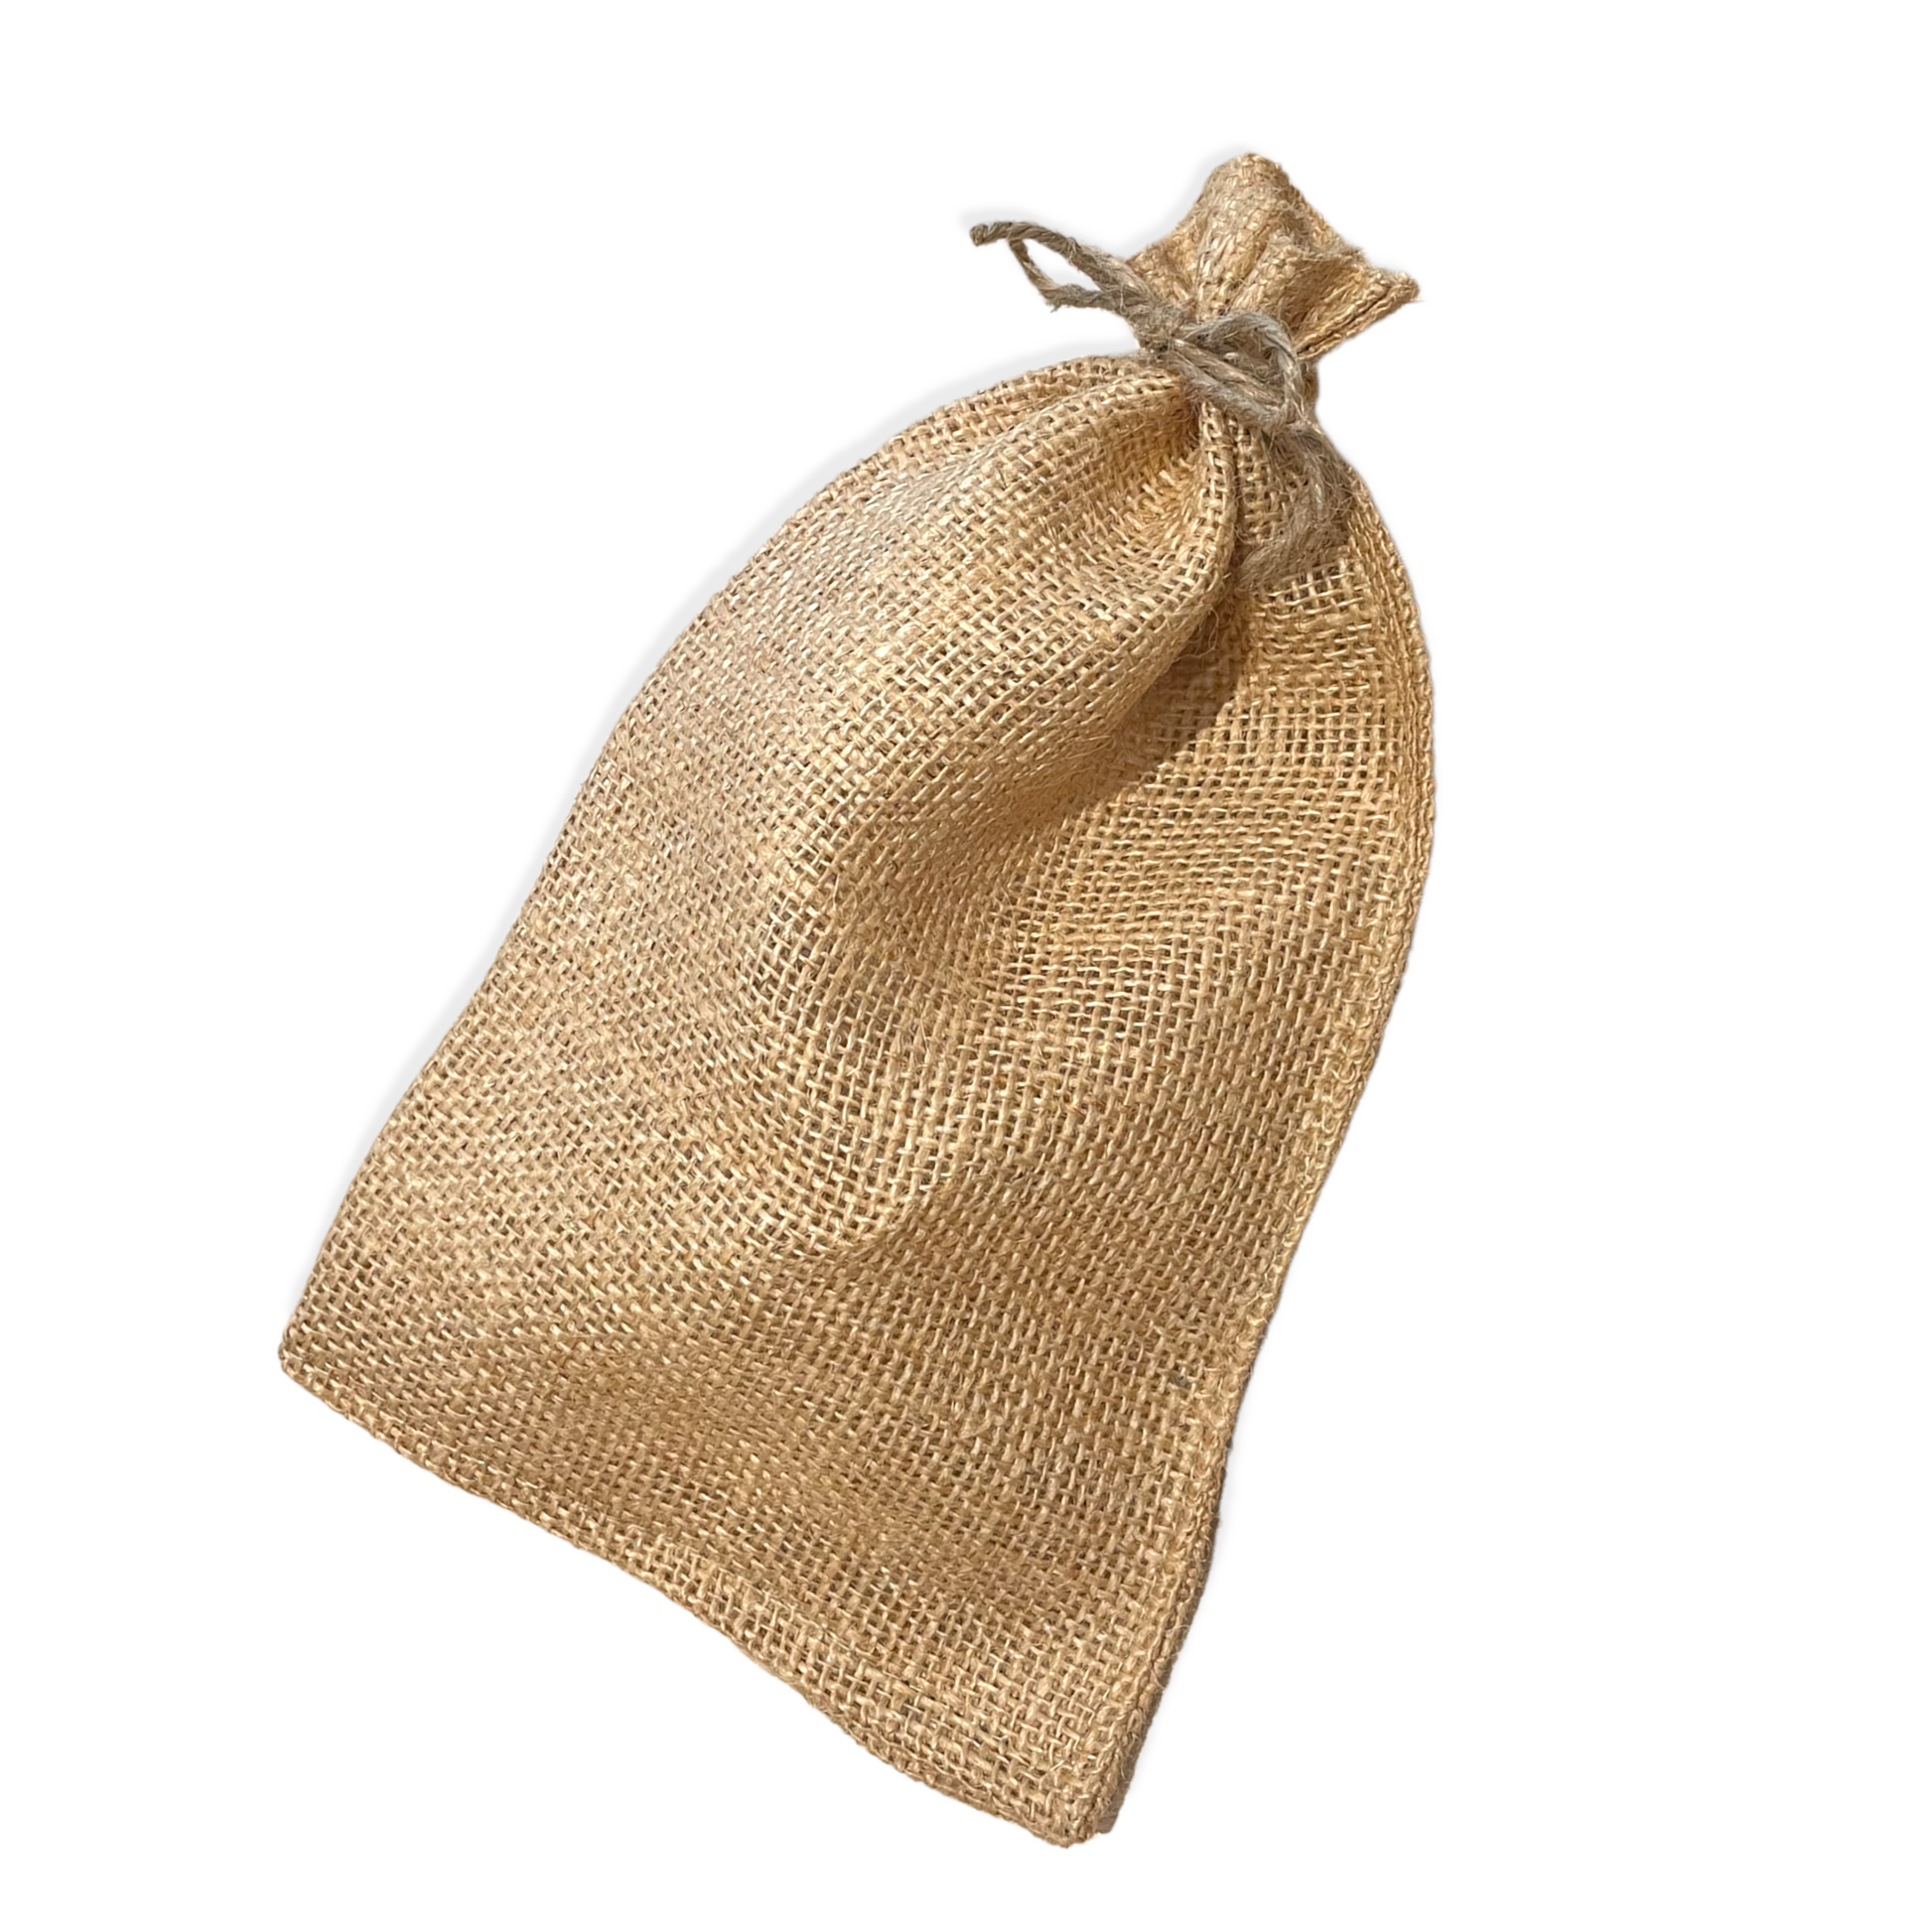 Tapleap Burlap Bags with Drawstring, 12 x 16 inches (Lot of 10) Burlap  Favor Sacks for Wrapping Gifts, Birthday, Wedding, Halloween Party or  Household Use(Original) : Amazon.in: Home & Kitchen